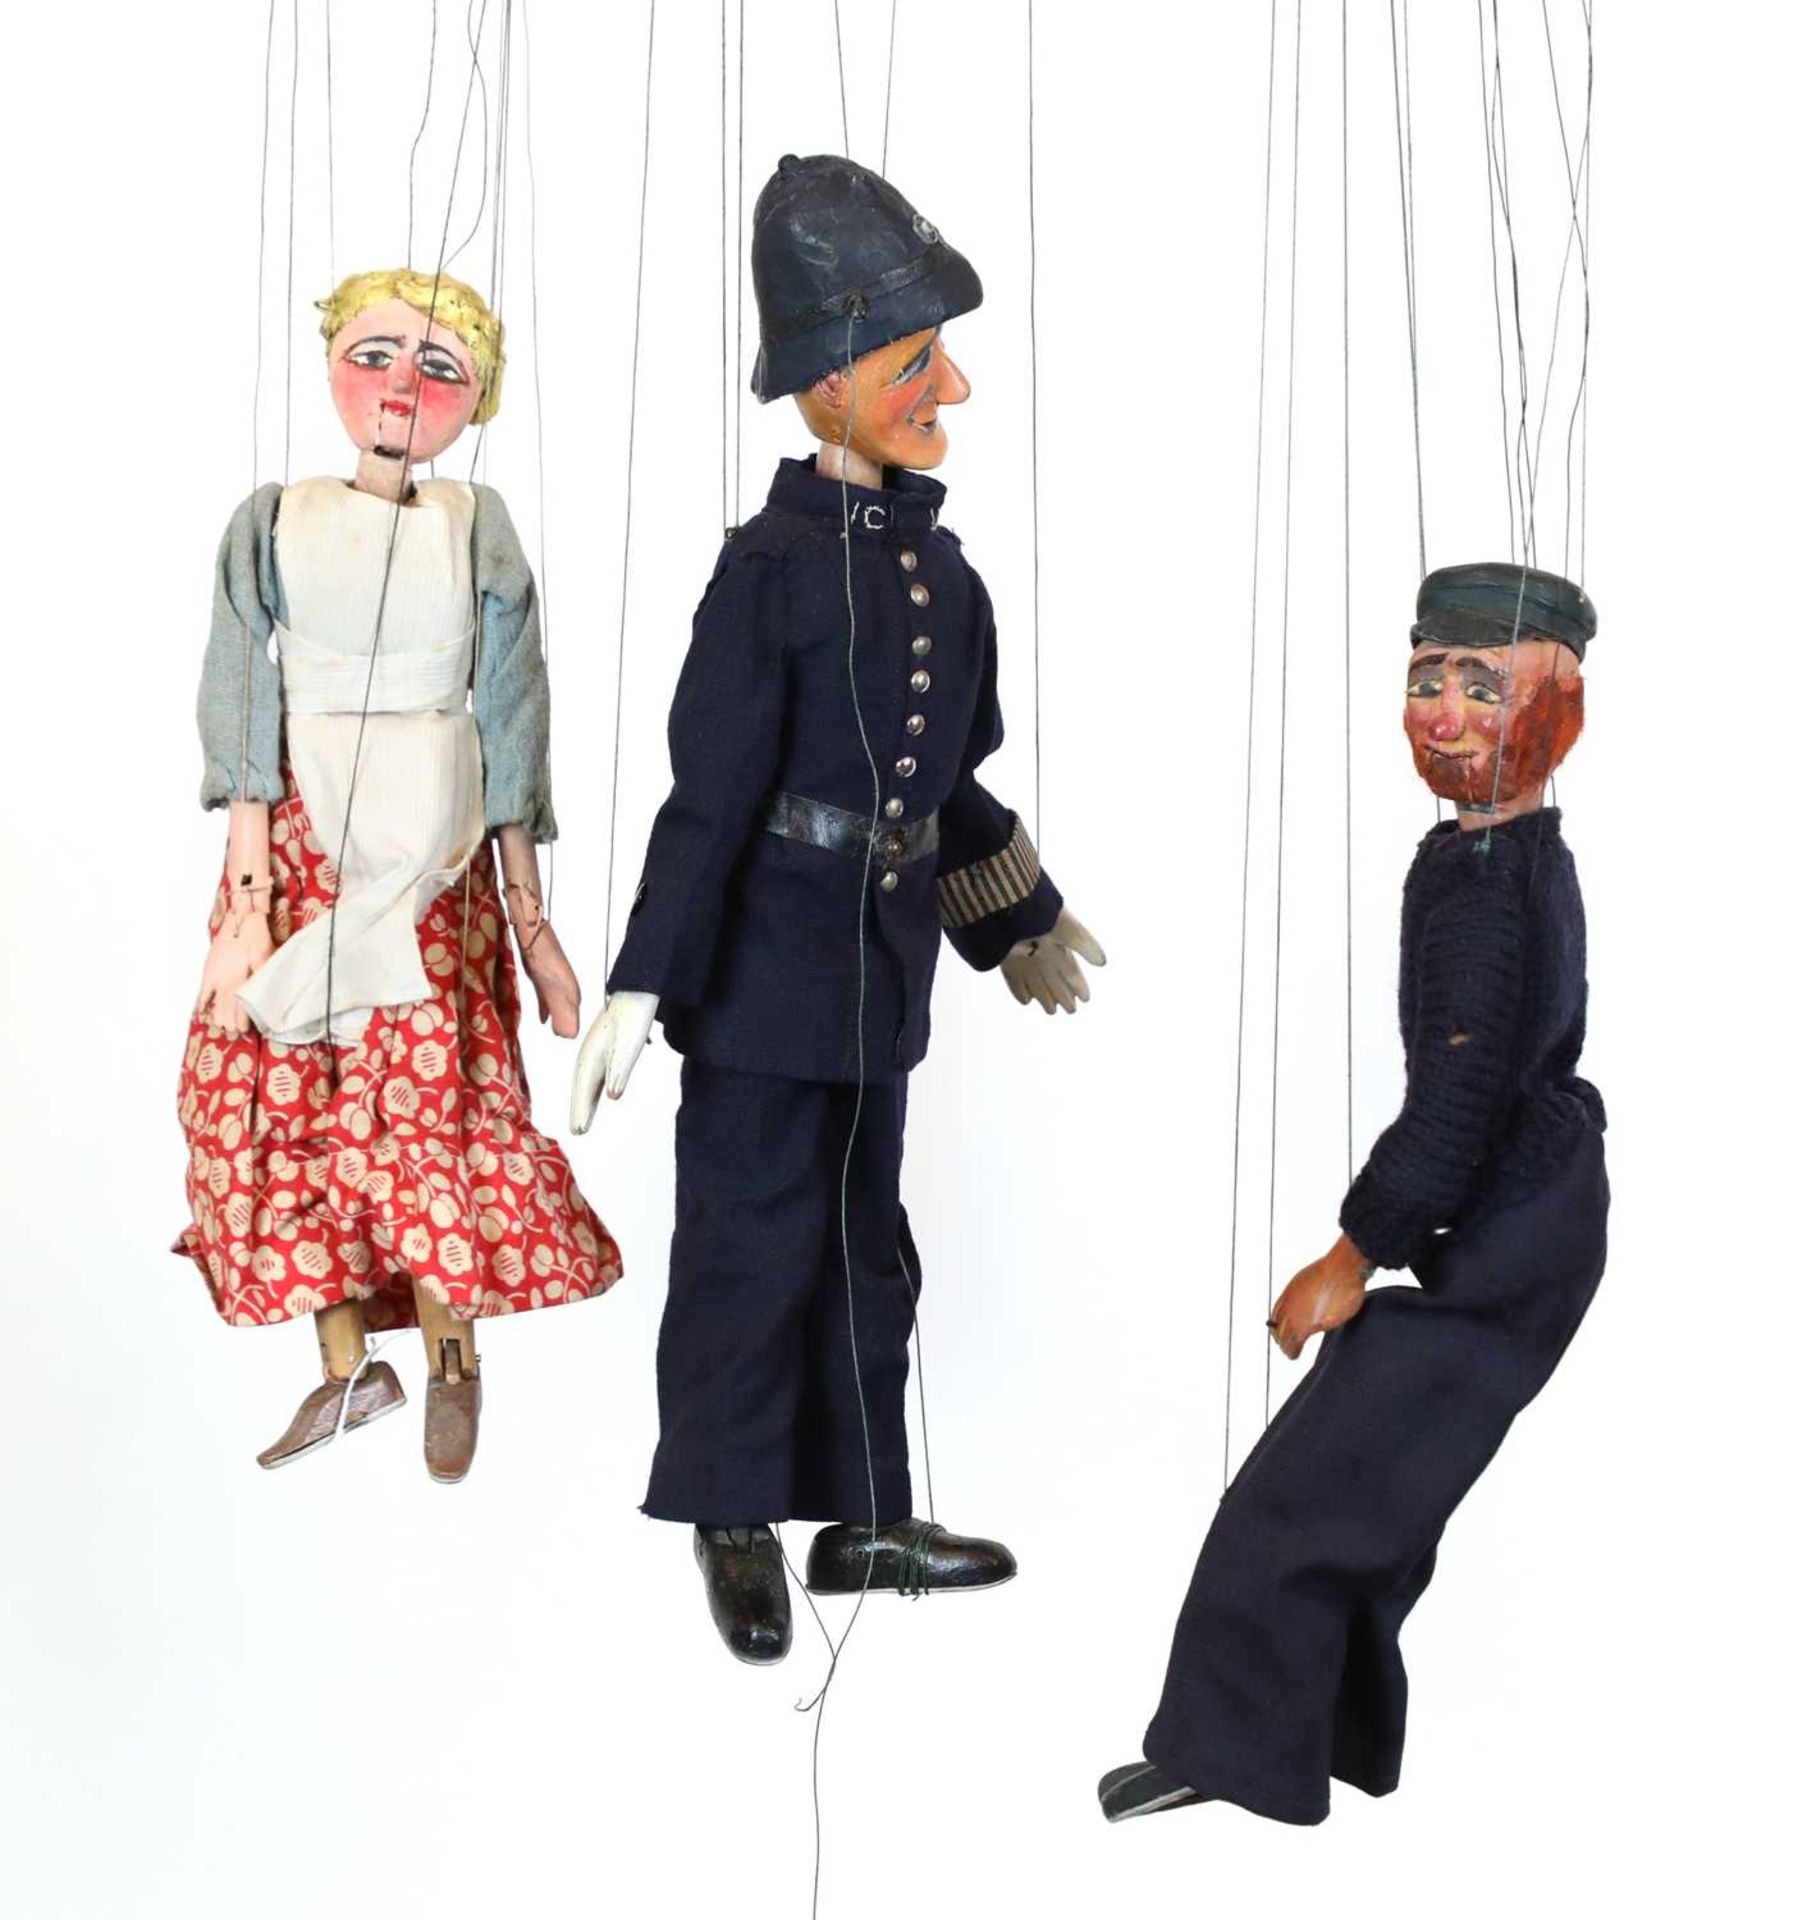 The Jacquard Puppets,